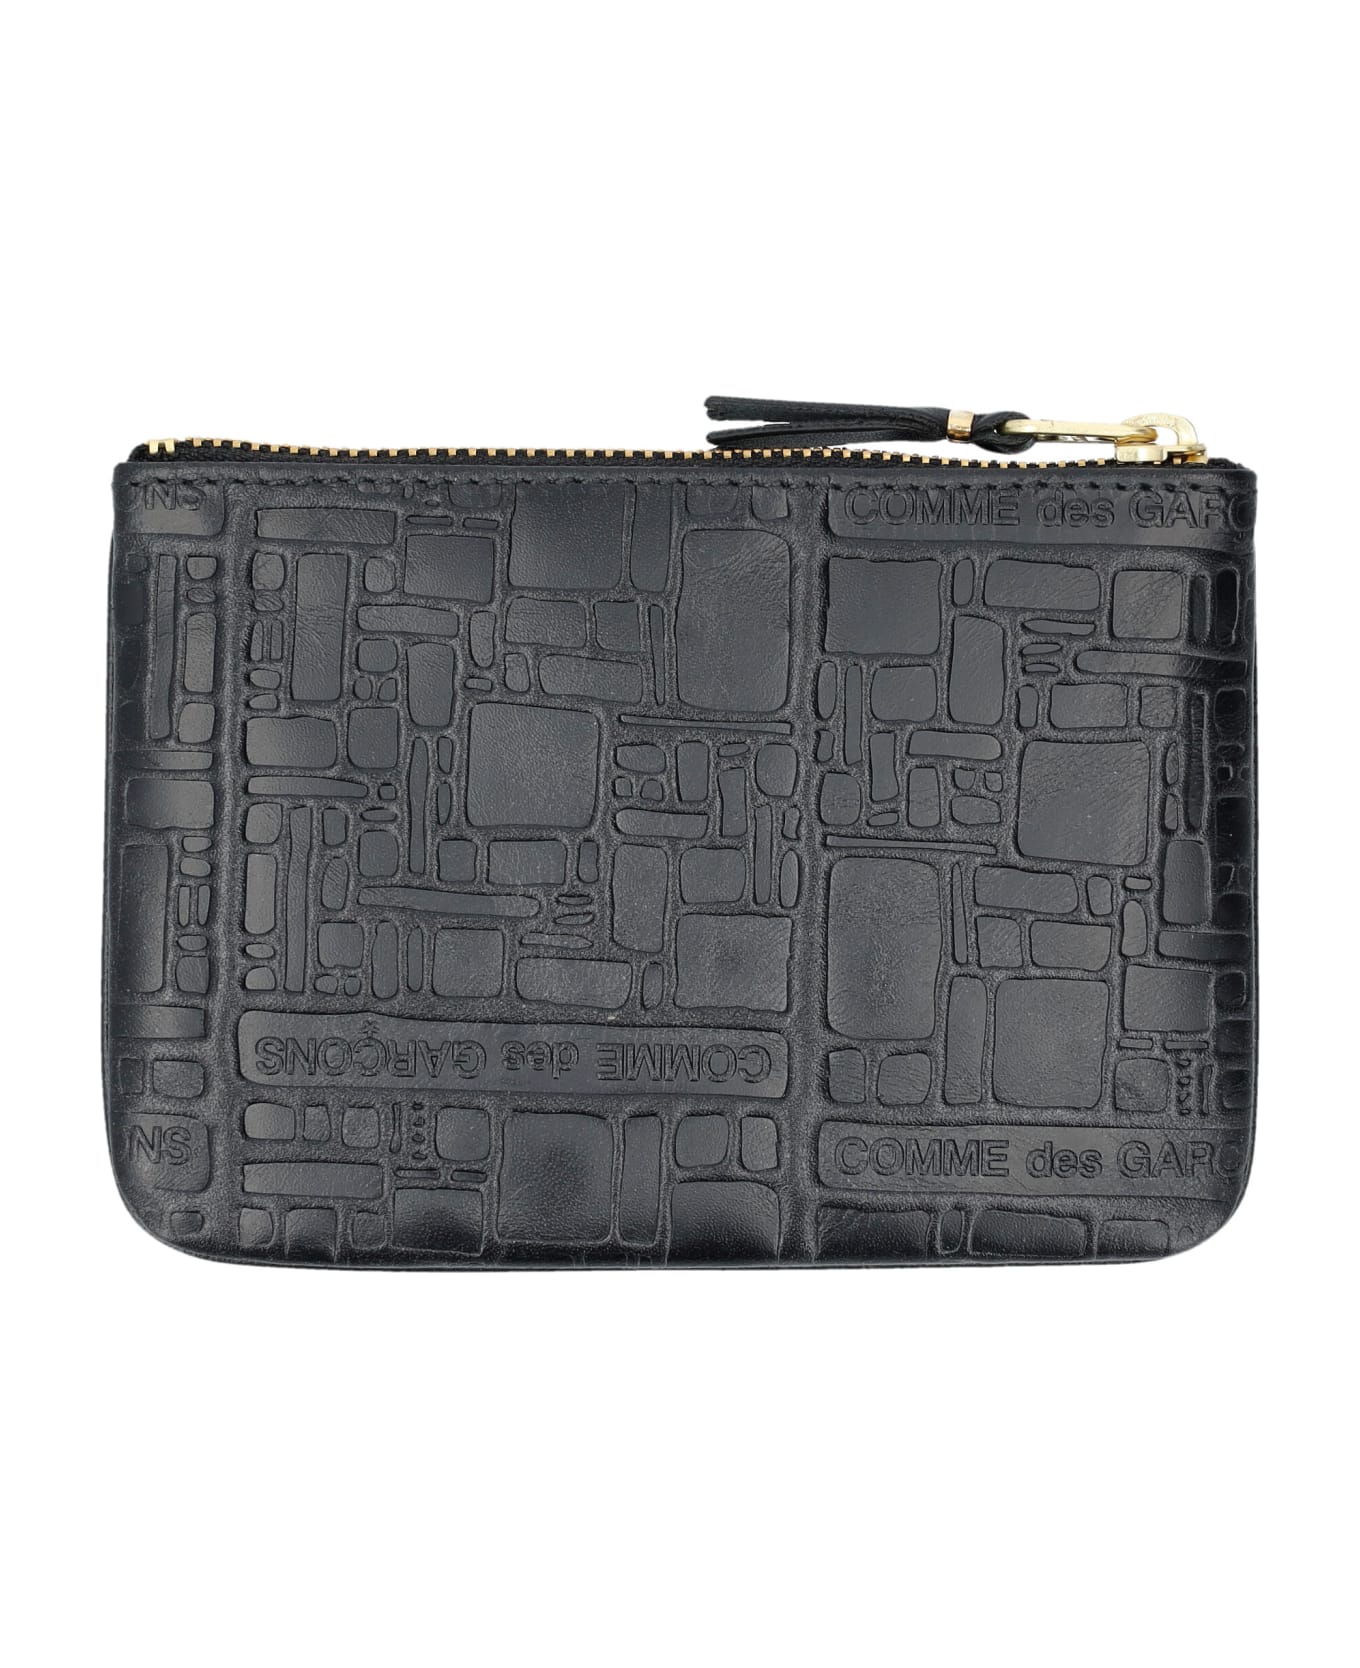 Comme des Garçons Wallet Embossed Logotype Xsmall Pouch - BLACK